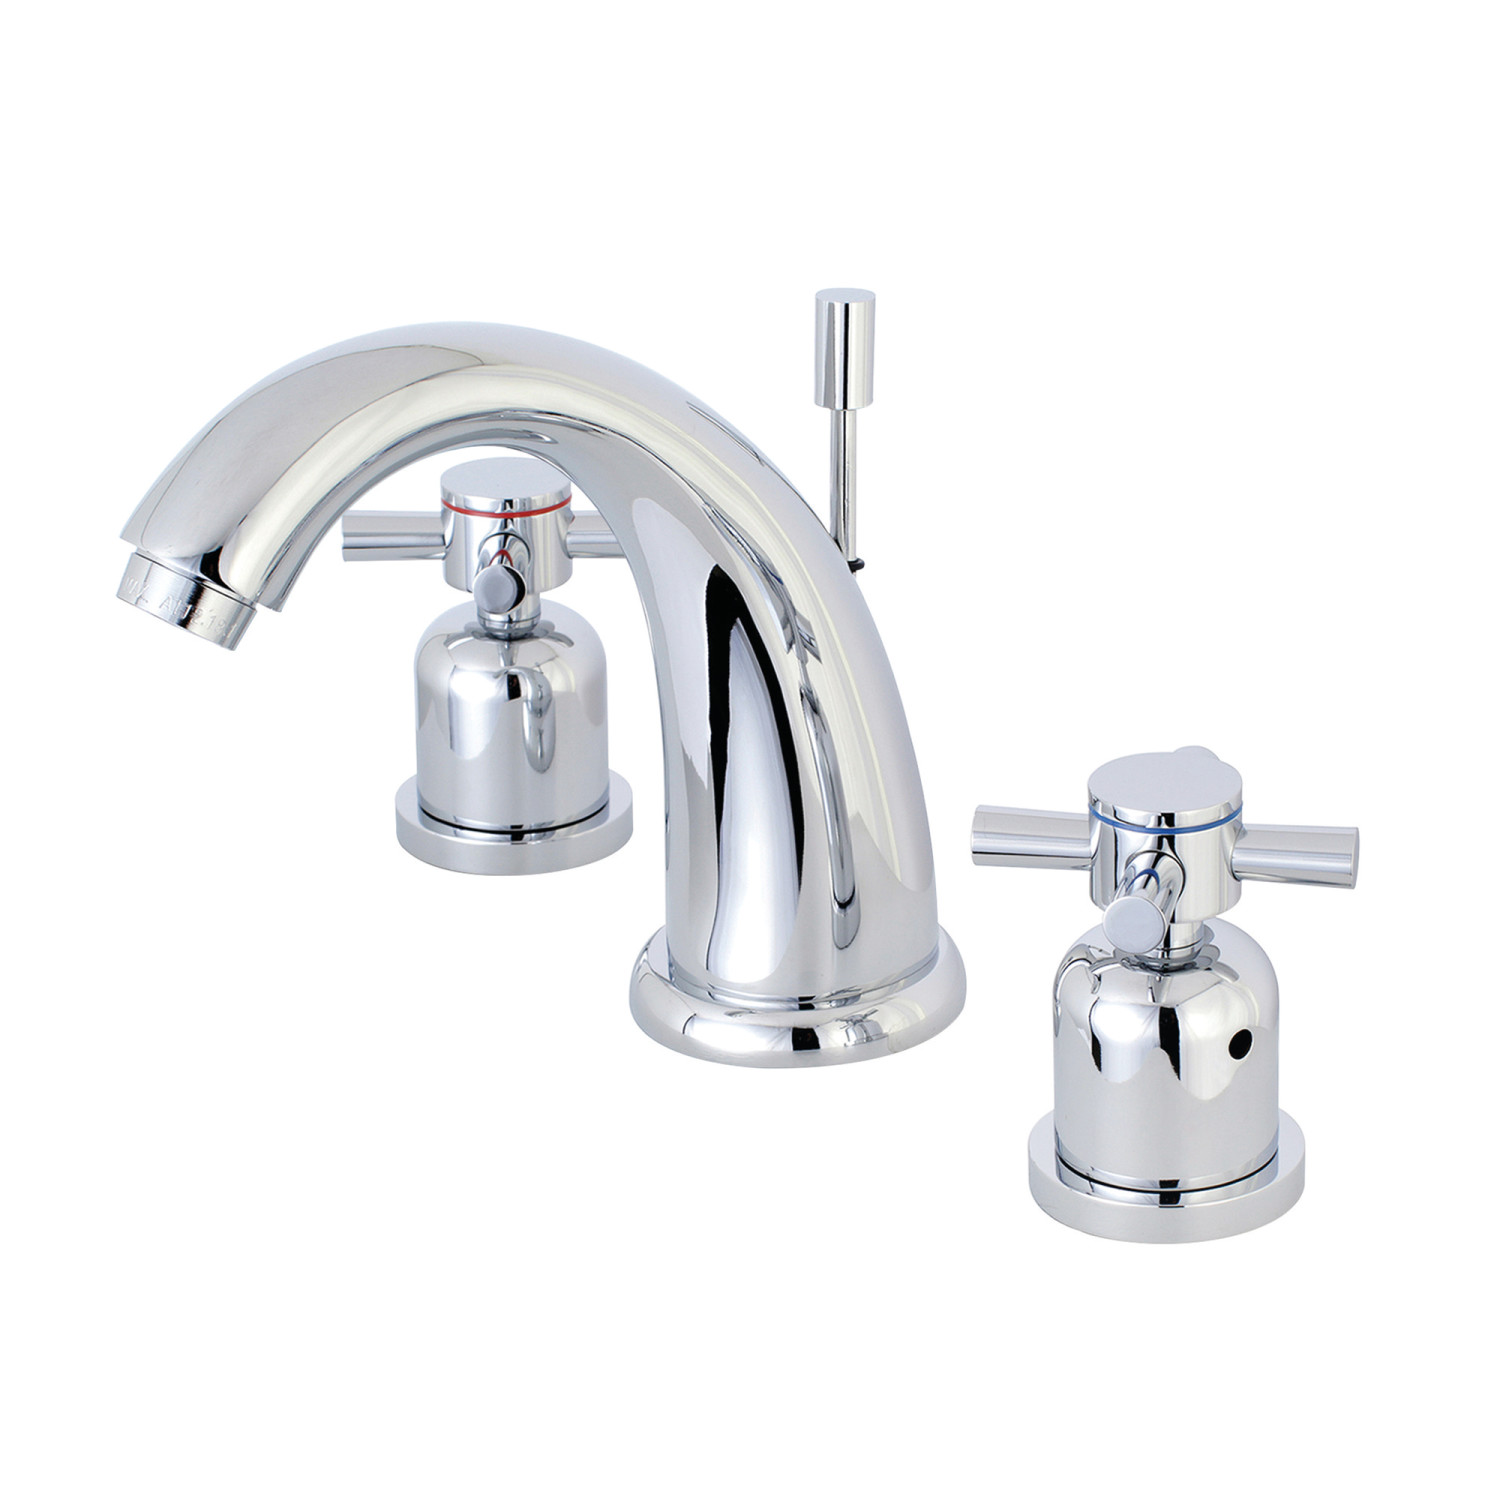 Modern Two-Handle Three-Hole Deck Mounted Widespread Bathroom Faucet with Plastic Pop-Up in Polished Chrome